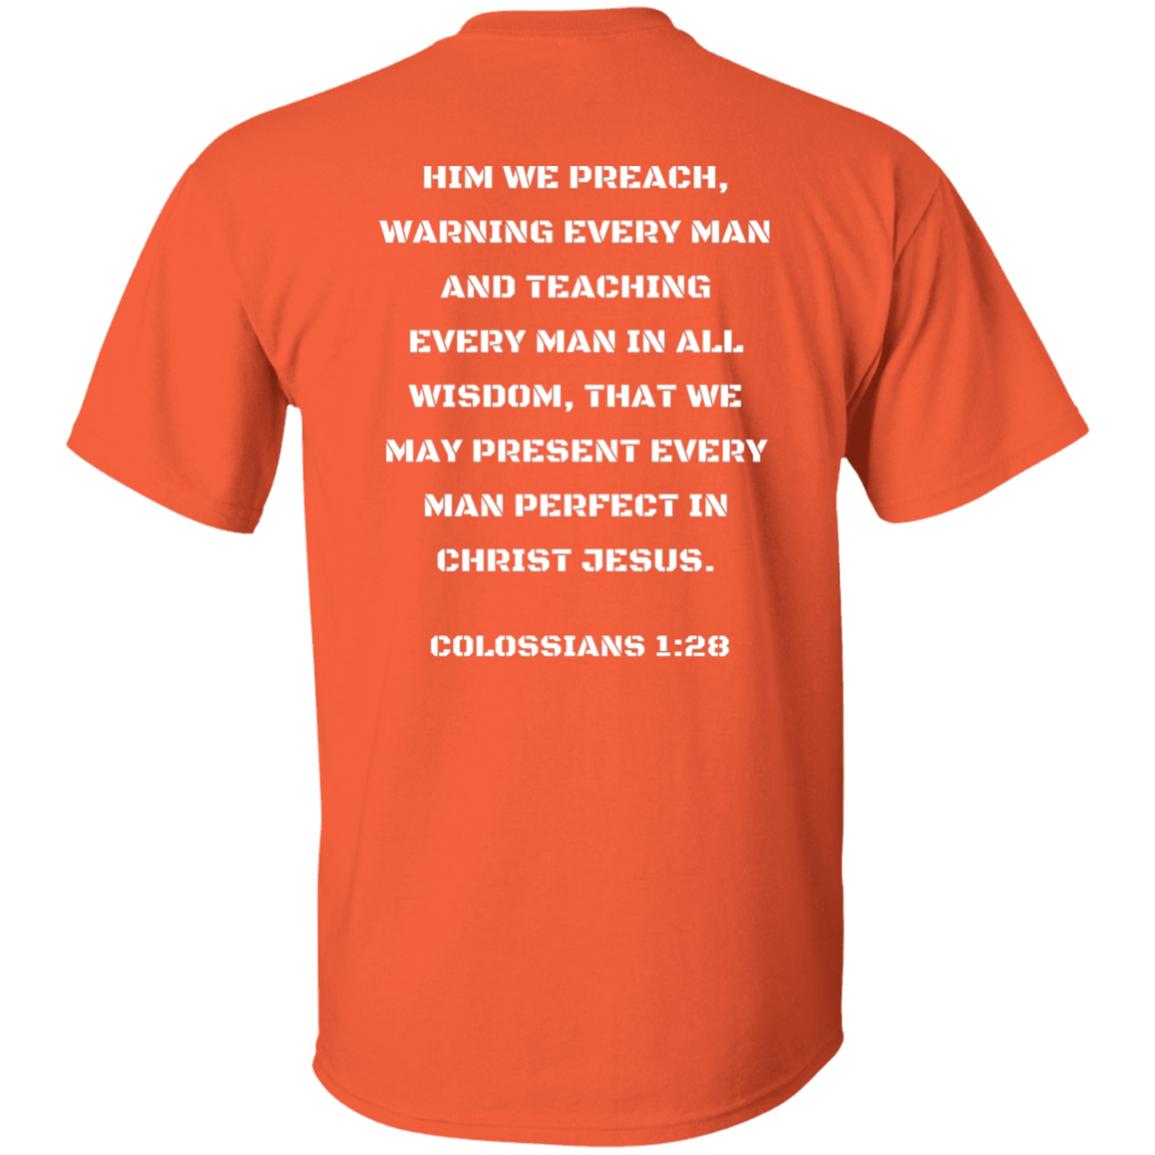 Accountable to Jesus T-Shirt | 2-Sided